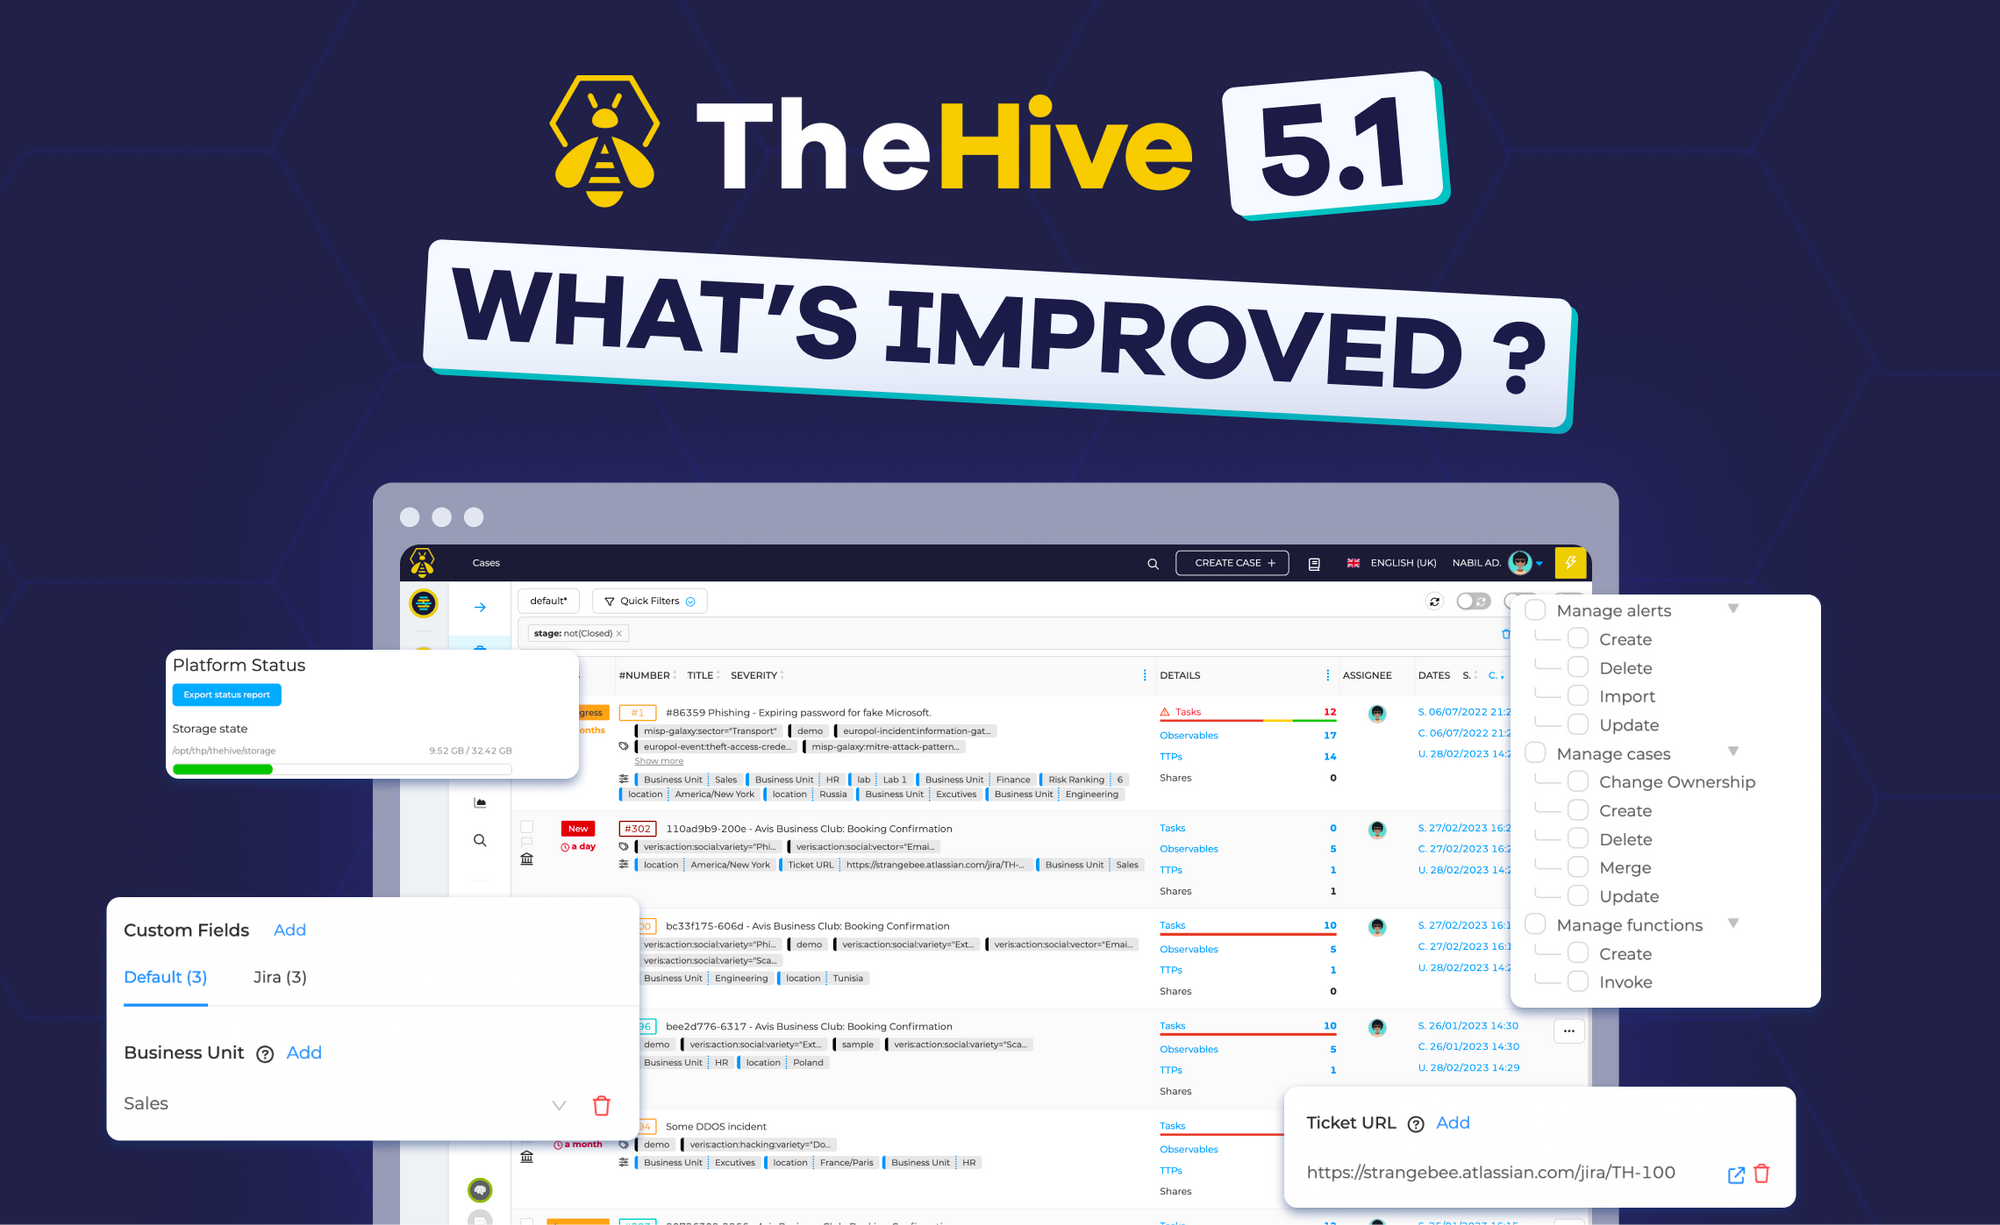 TheHive v5.1: Improved features